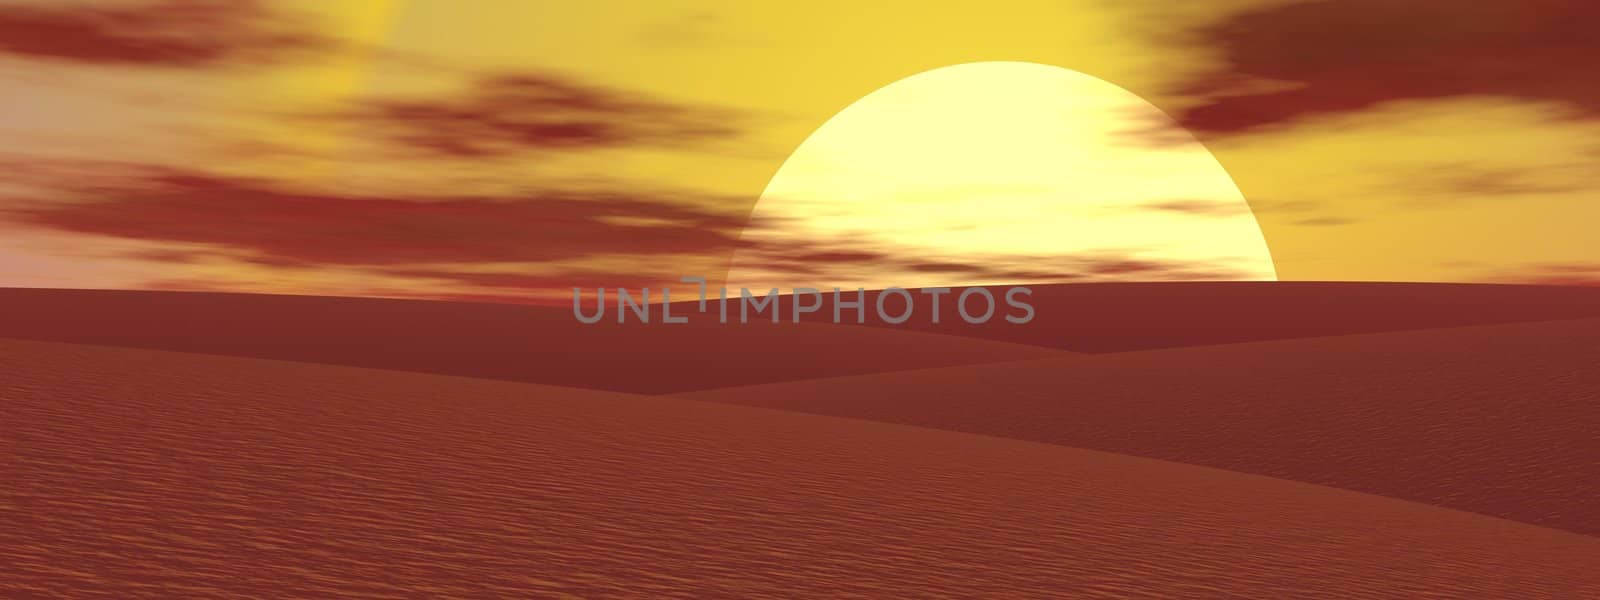 Big yellow sun over sand hills in the desert during sunset